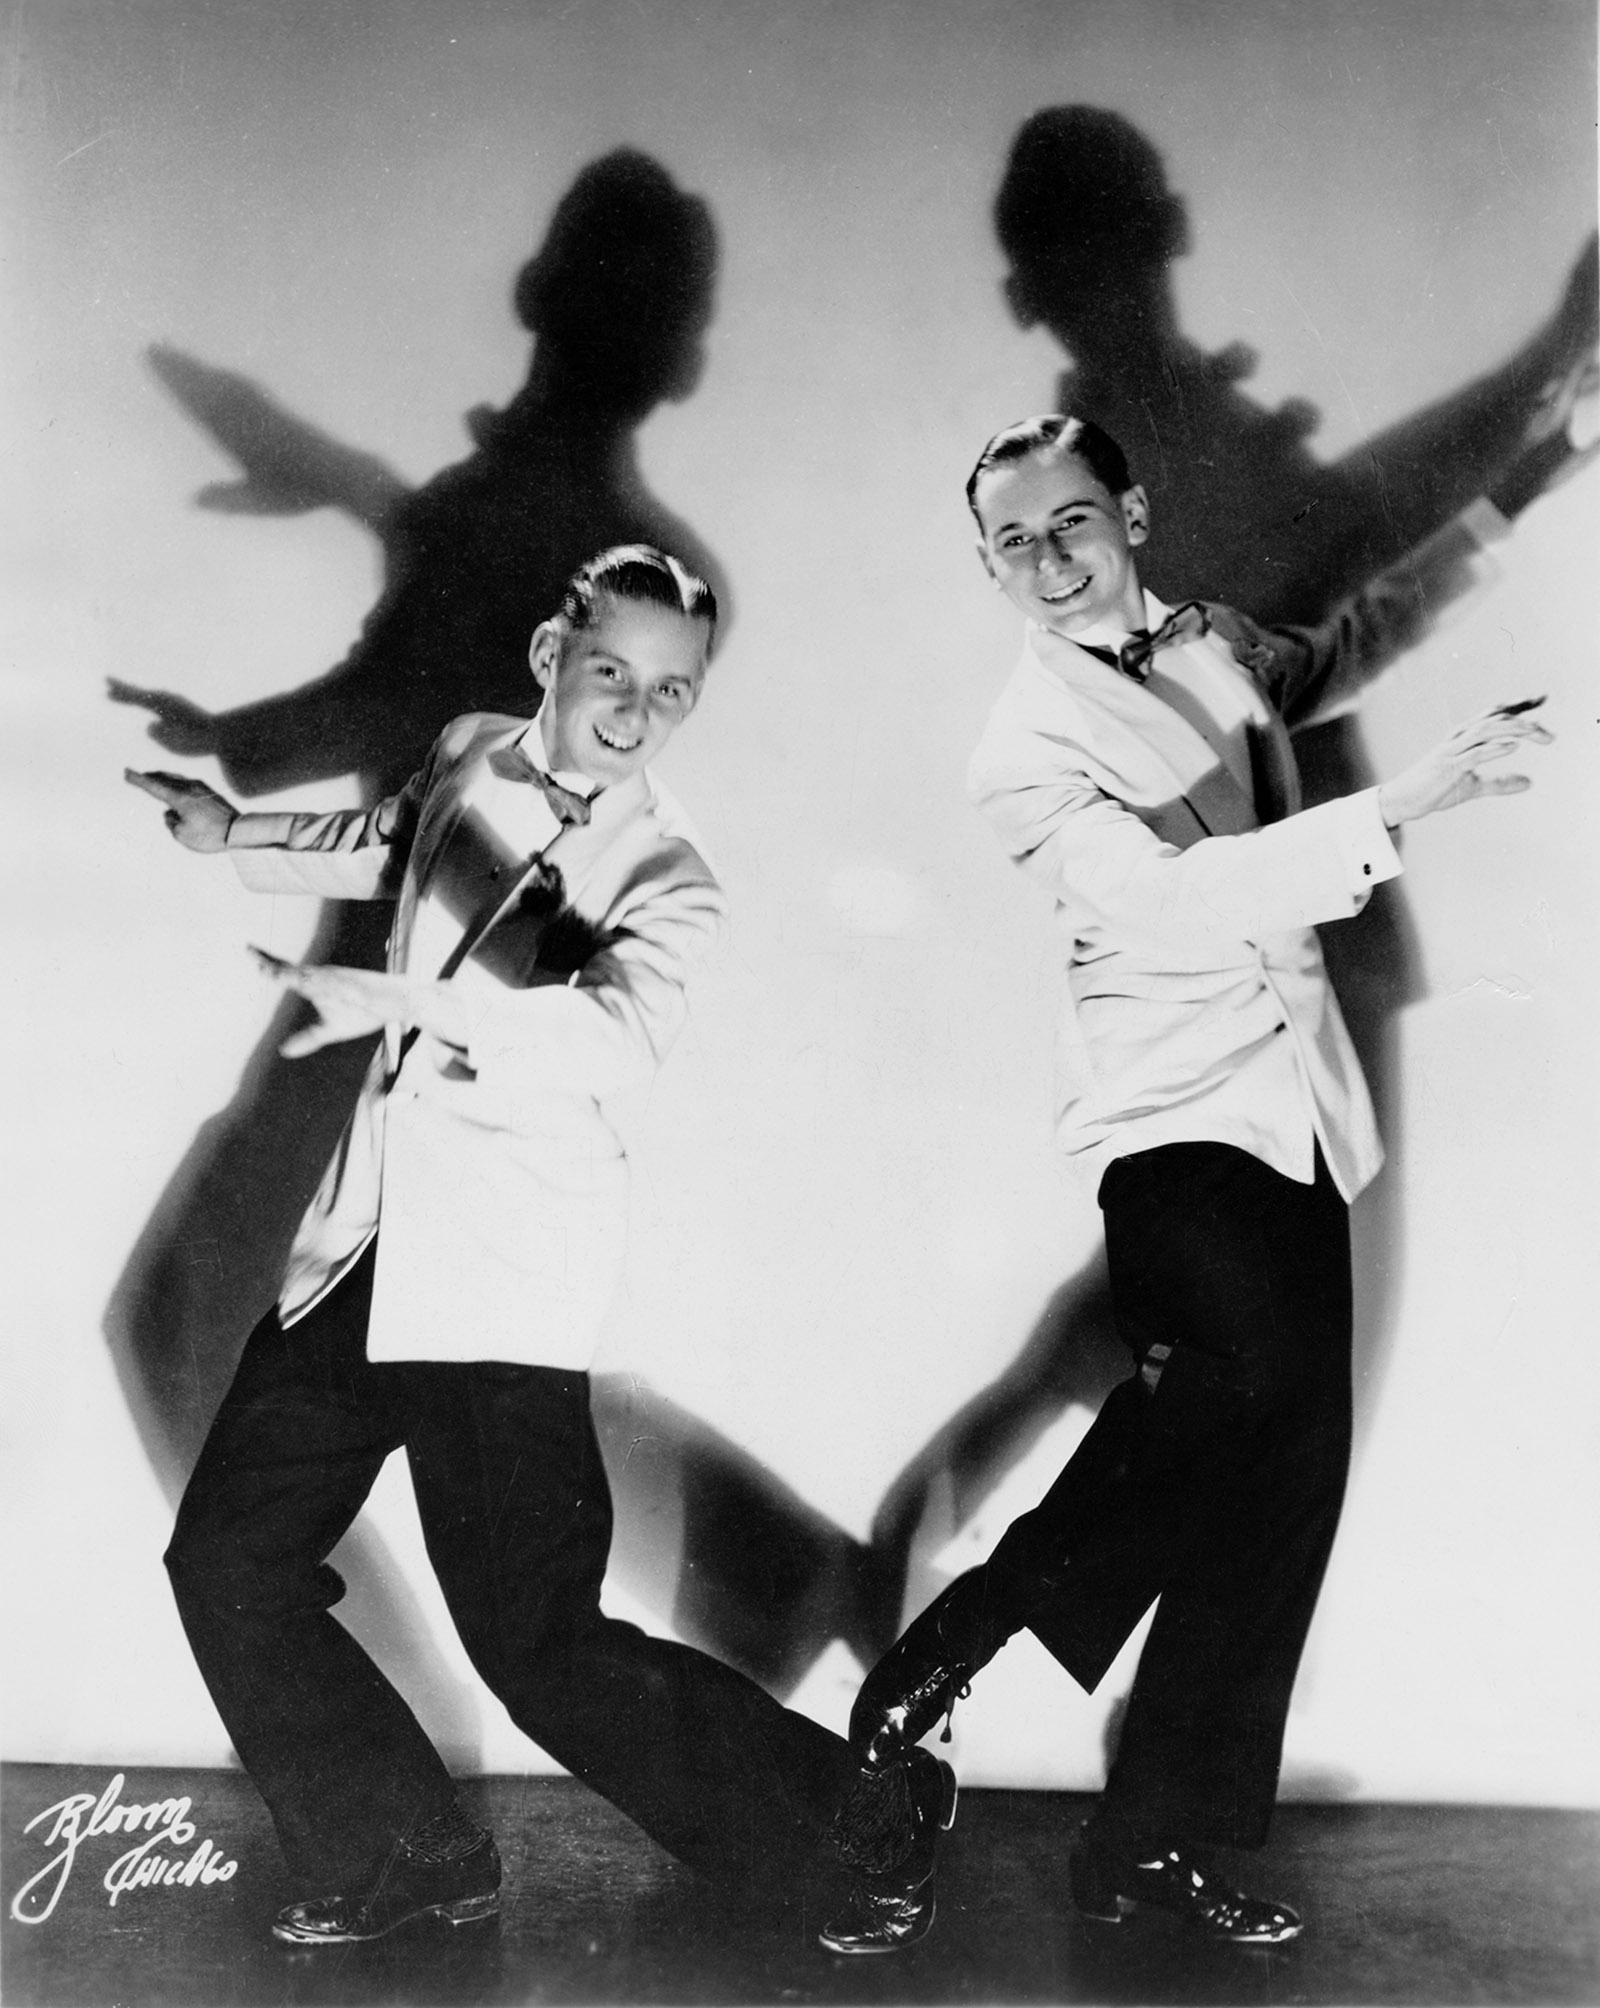 Bob Fosse and Charles Grass performing as the Riff Brothers, 1943